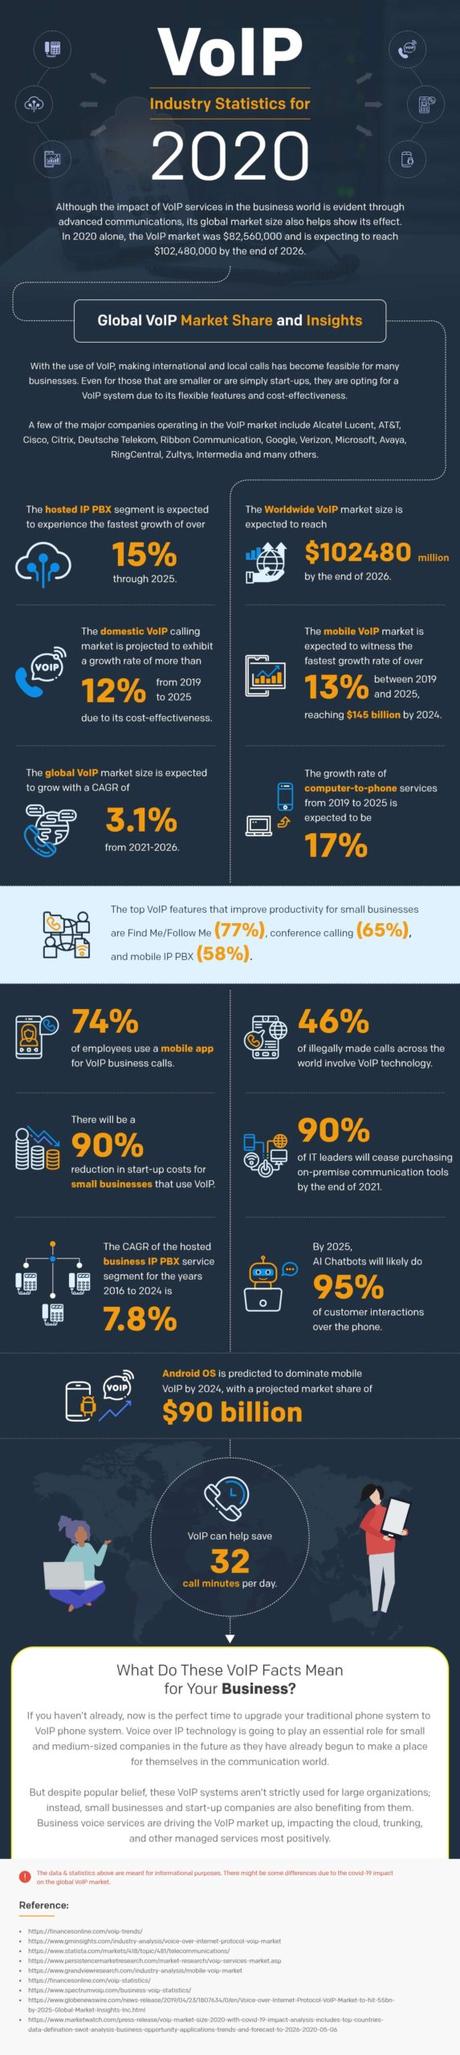 VoIP Industry Statistics for 2020 [Infographic]